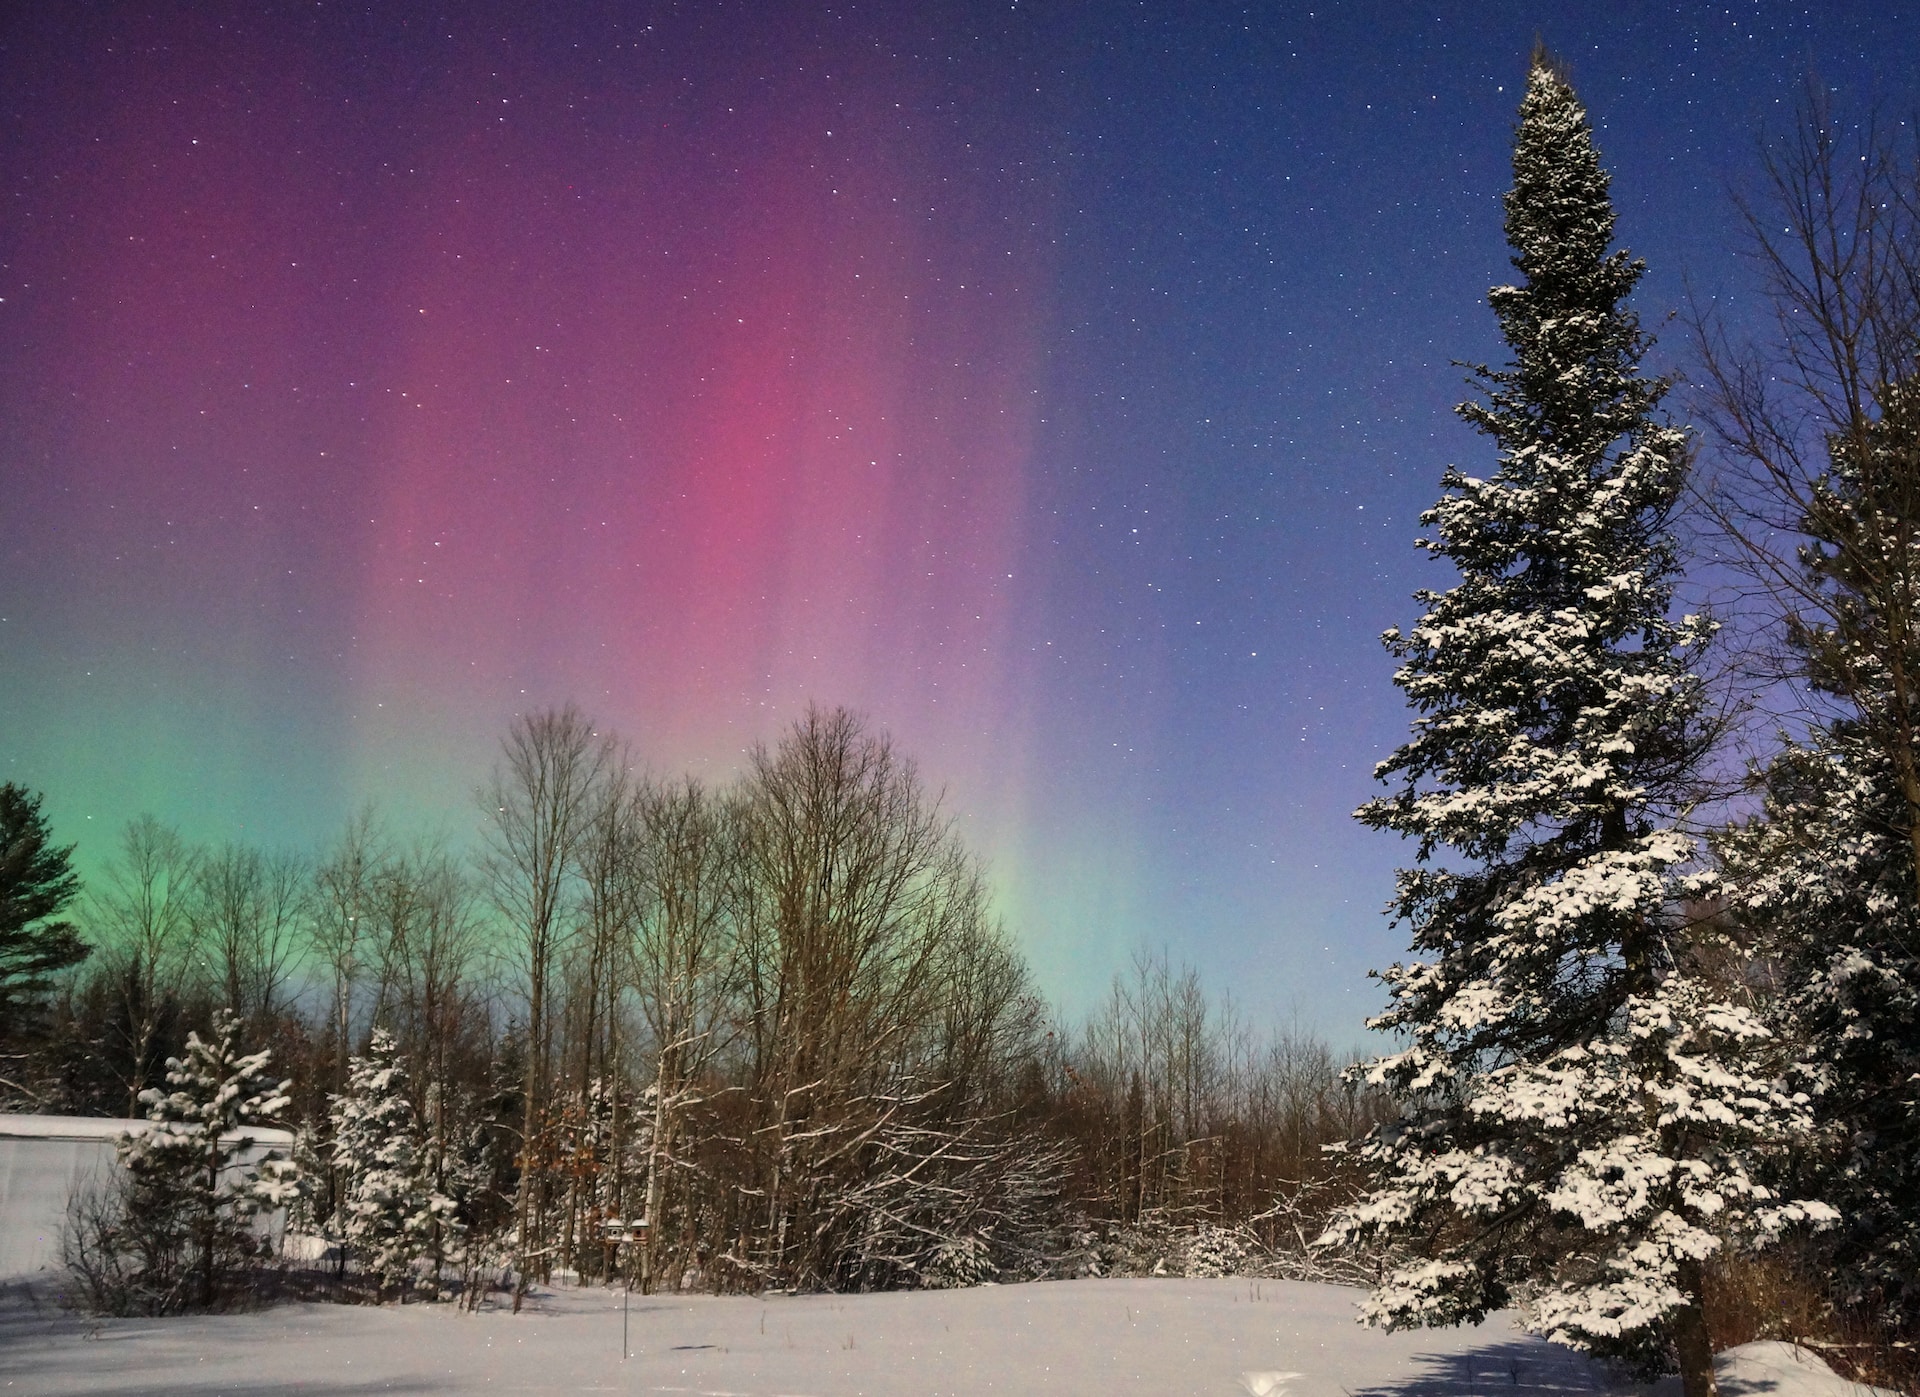 Northern lights in Maine during winter.